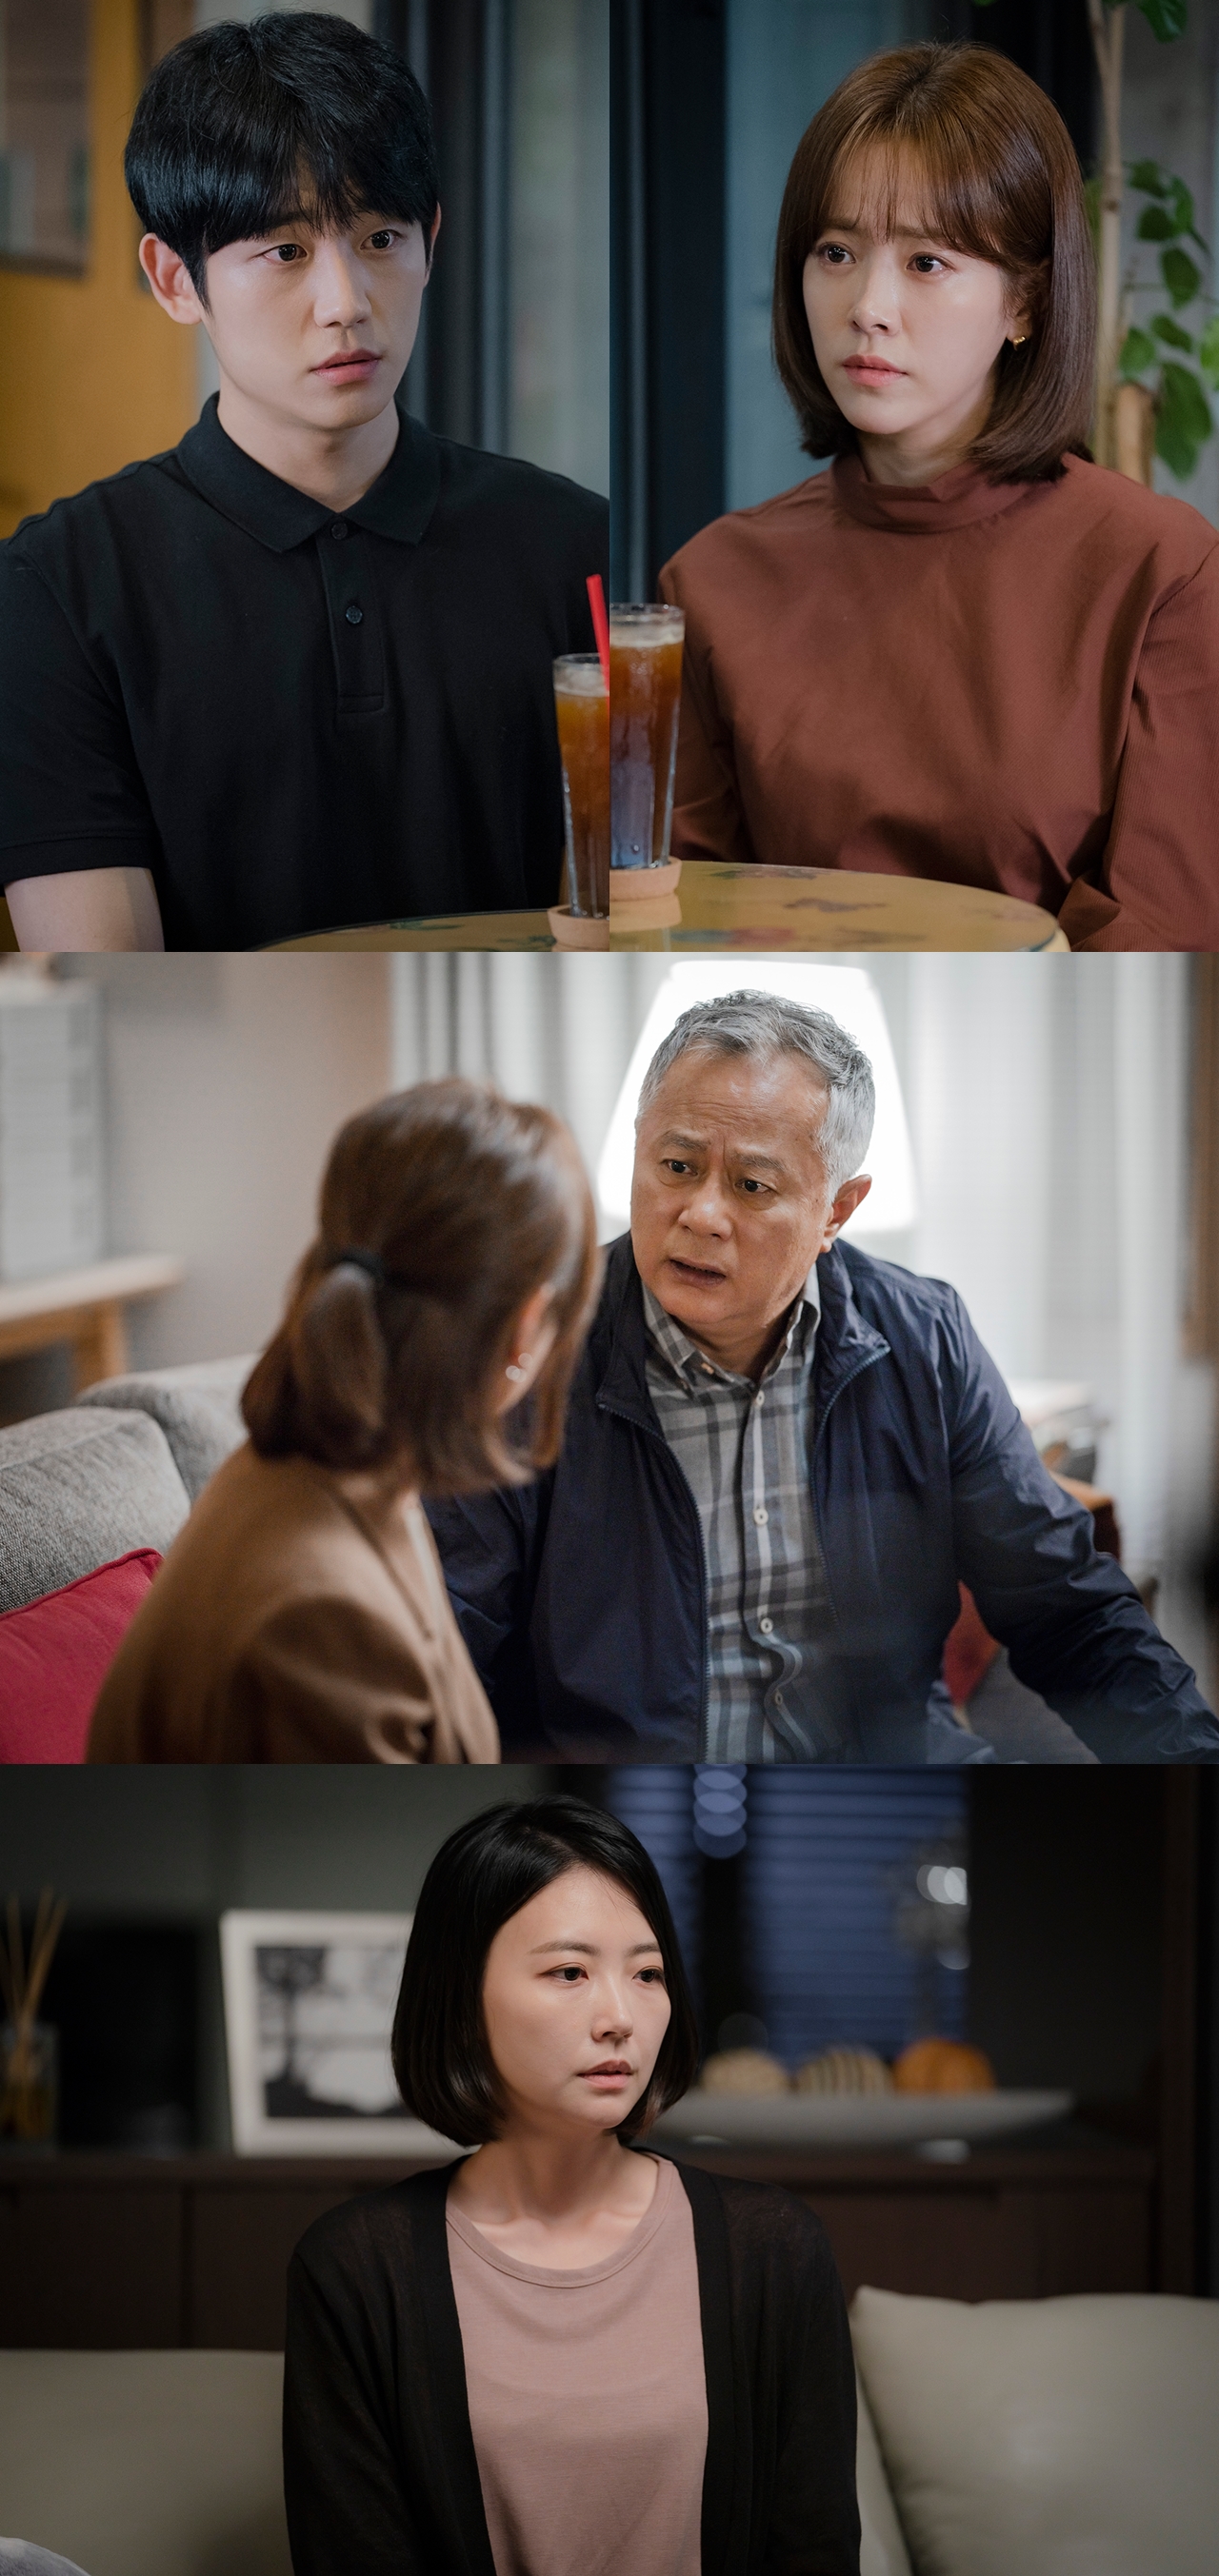 Spring Night will deliver a deep echo to the house theater until the end.MBC tree mini series Spring Night (director Ahn Pan-seok/playplayplay by Kim Eun/Produced Jay Espictures) is only four times ahead this week.Danger is coming to see if the two people will be able to meet a happy ending in front of the reason (Lee Jung-in + Yoo Ji-Ho) couple who have been feeling toward each other even in the opposition around them.I looked at the point of observation that I should not miss until the end of what the story of Spring Night will end.# The reason couples Danger! The tears of Yoo Ji-Ho that exploded anxiety!The news of his son Yoo Eun-woo (Hian), who was always calm and unwavering, but suddenly heard, revealed his anxiety.In the end, Yoo Ji-Ho exploded his anxiety toward Lee Jung-in (Han Ji-min) in a drunken mood, and Lee Jung-in felt confused by his words.The audience is increasingly curious about whether the two people who are happy and depend on each other will overcome anxiety in their hearts and find laughter again.Lee Tae-hak, who doesnt acknowledge #Yoo Ji-Ho! Can we overcome his objections?!Lee Tae-hak (Song Seung-hwan) has hoped that his daughter Lee Jung-in will marry Kwon Ki-seok (Kim Jun-han), the son of the chairman.However, Lee Jung-in is angry that he meets the single daddy Yoo Ji-Ho after breaking up with Kwon Ki-seok, and he asserted that he can never admit the relationship between the two.Yoo Ji-Hos mother Ko Sook-hee (Kim Jung-young) also shared her heartfelt heart with Lee Jung-ins mother Shin Hyung-sun (Gil Hae-yeon), who happened to meet while she was unable to give a worried look toward the two.With the warm comfort and sincerity of the two mothers, it is noteworthy whether Lee Jung-in and Yoo Ji-Ho will overcome Lee Tae-haks opposition and meet a happy ending.# Her new start to be happy! Standing alone by the Seo-yool Lee!The fact that there was a pain in the marriage of Seo-young Lee (Lim Sung-hyun) came to the audience as well as the family.It was revealed that she made a decision to write the last method after continuing the conflict with Nam Si-hoon (Lee Mu-saeng), who had not insisted that she could not divorce only earlier.As the question of how the Seo-young Lee will divorce is growing, the support of viewers is continuing in her solo stand.The deep sensitivity of Spring Night, which evokes empathy for various stories that can not be missed until the end, and the melodic chemistry of Han Ji-min and two actors Jung Hae-in will be added, and the emotional melodrama will convey a deep feeling to viewers.iMBC  Photos